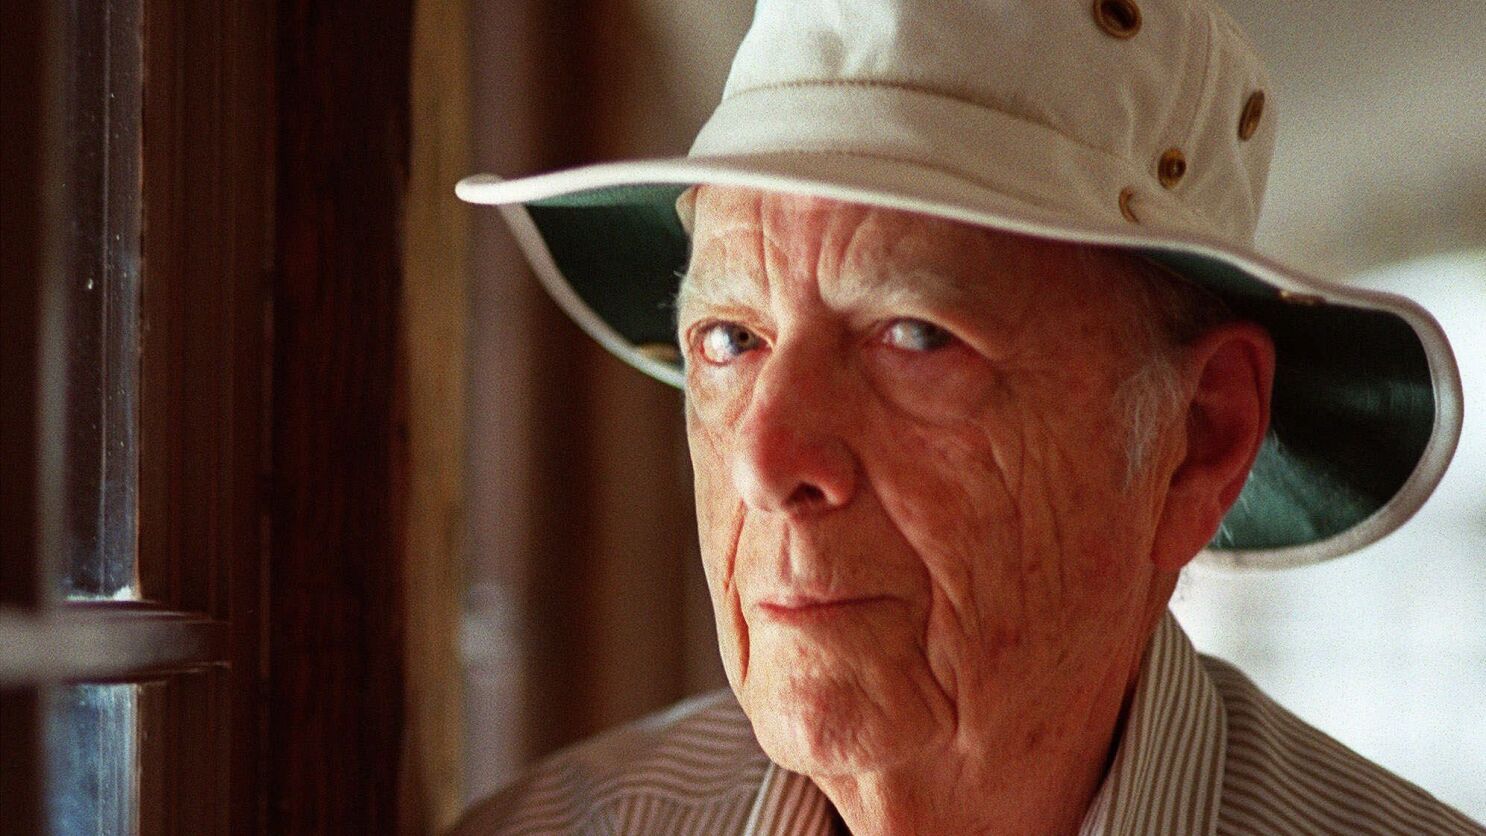 Herman Wouk Revered Author Of The Caine Mutiny And The Winds